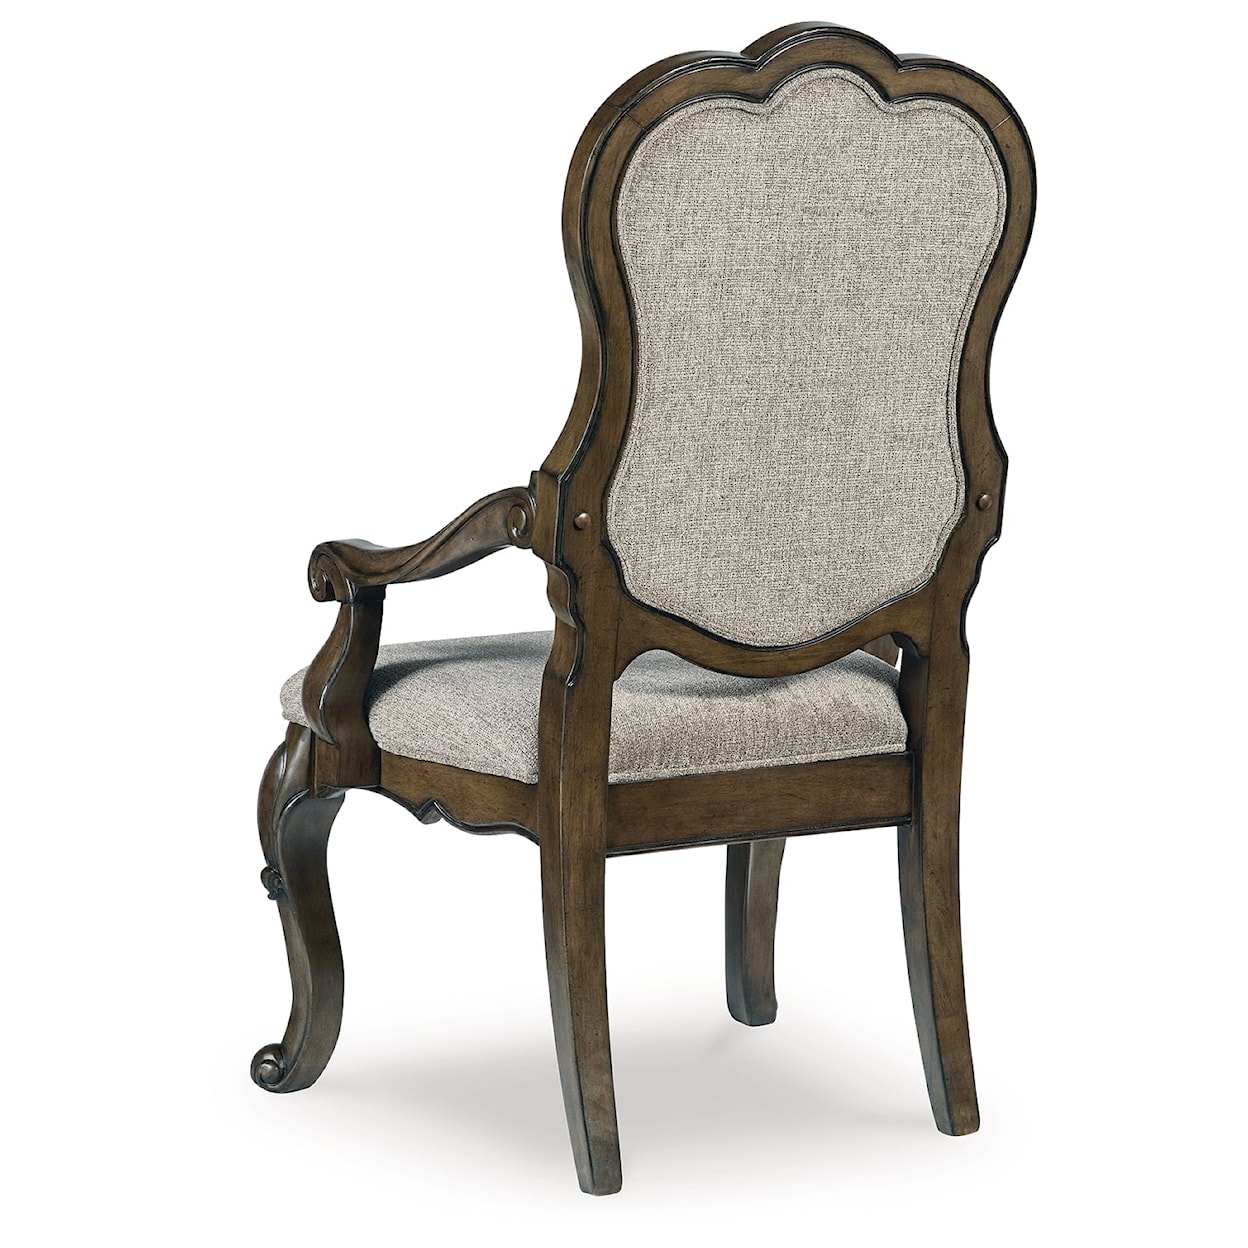 Signature Maylee Dining Upholstered Arm Chair